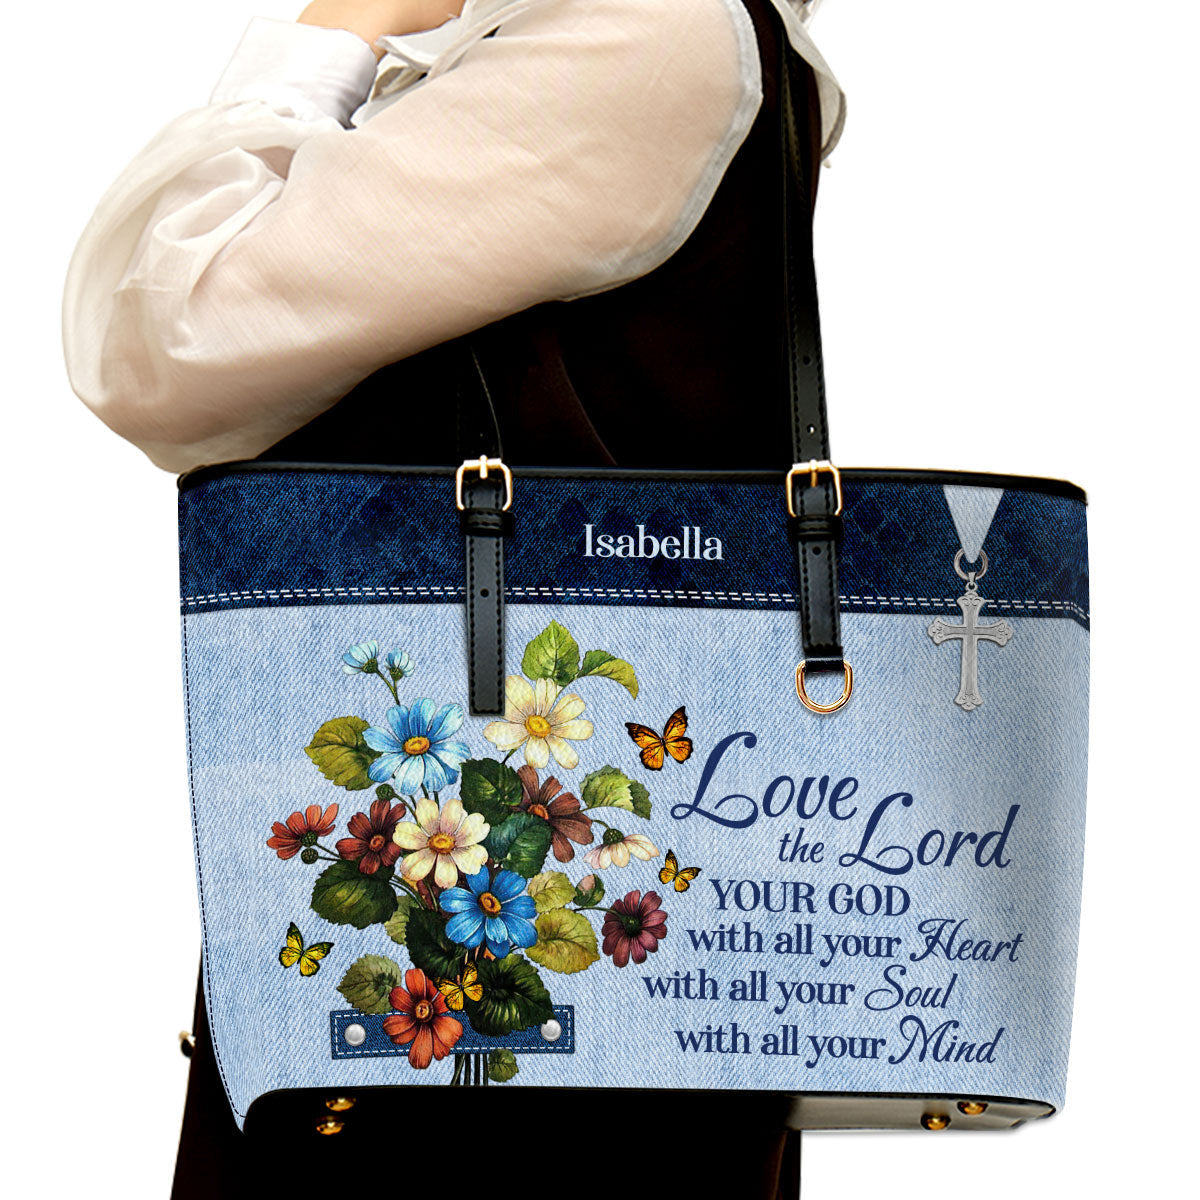 Love The Lord Your God With All Your Heart Personalized Large Leather Tote Bag Matthew 2237 - Christian Inspirational Gifts For Women